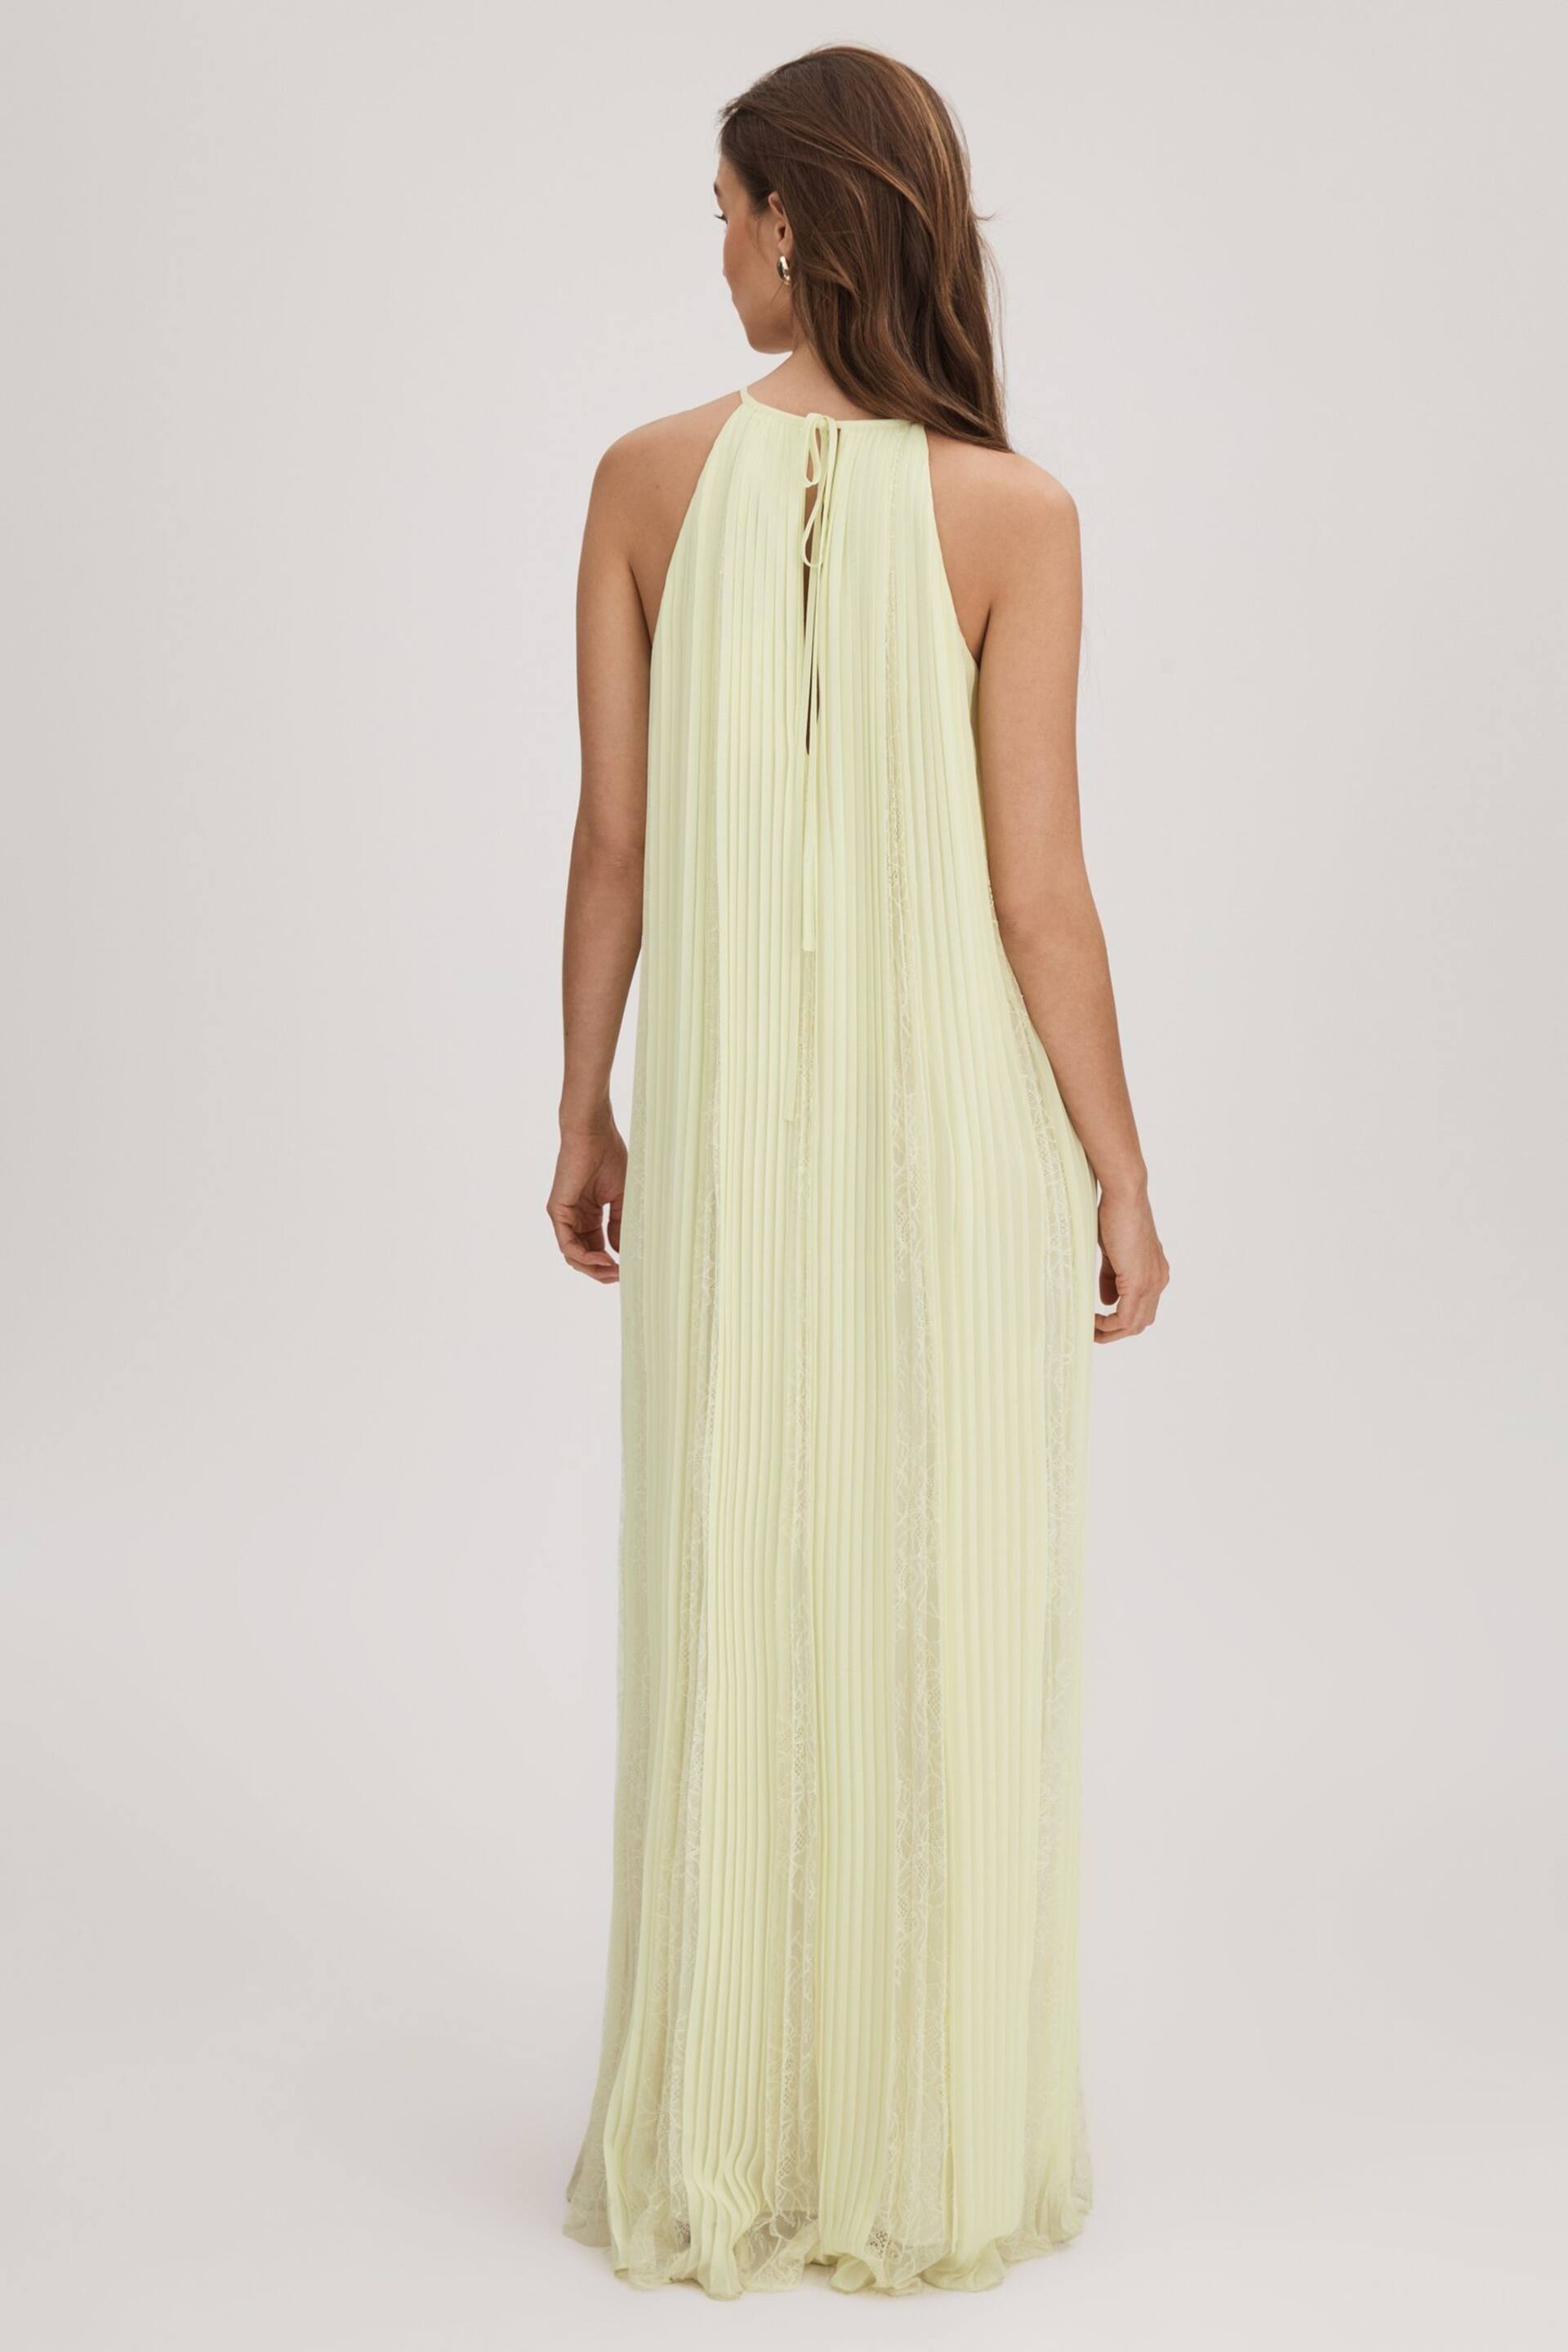 Florere Lace Pleated Maxi Dress - Image 5 of 5